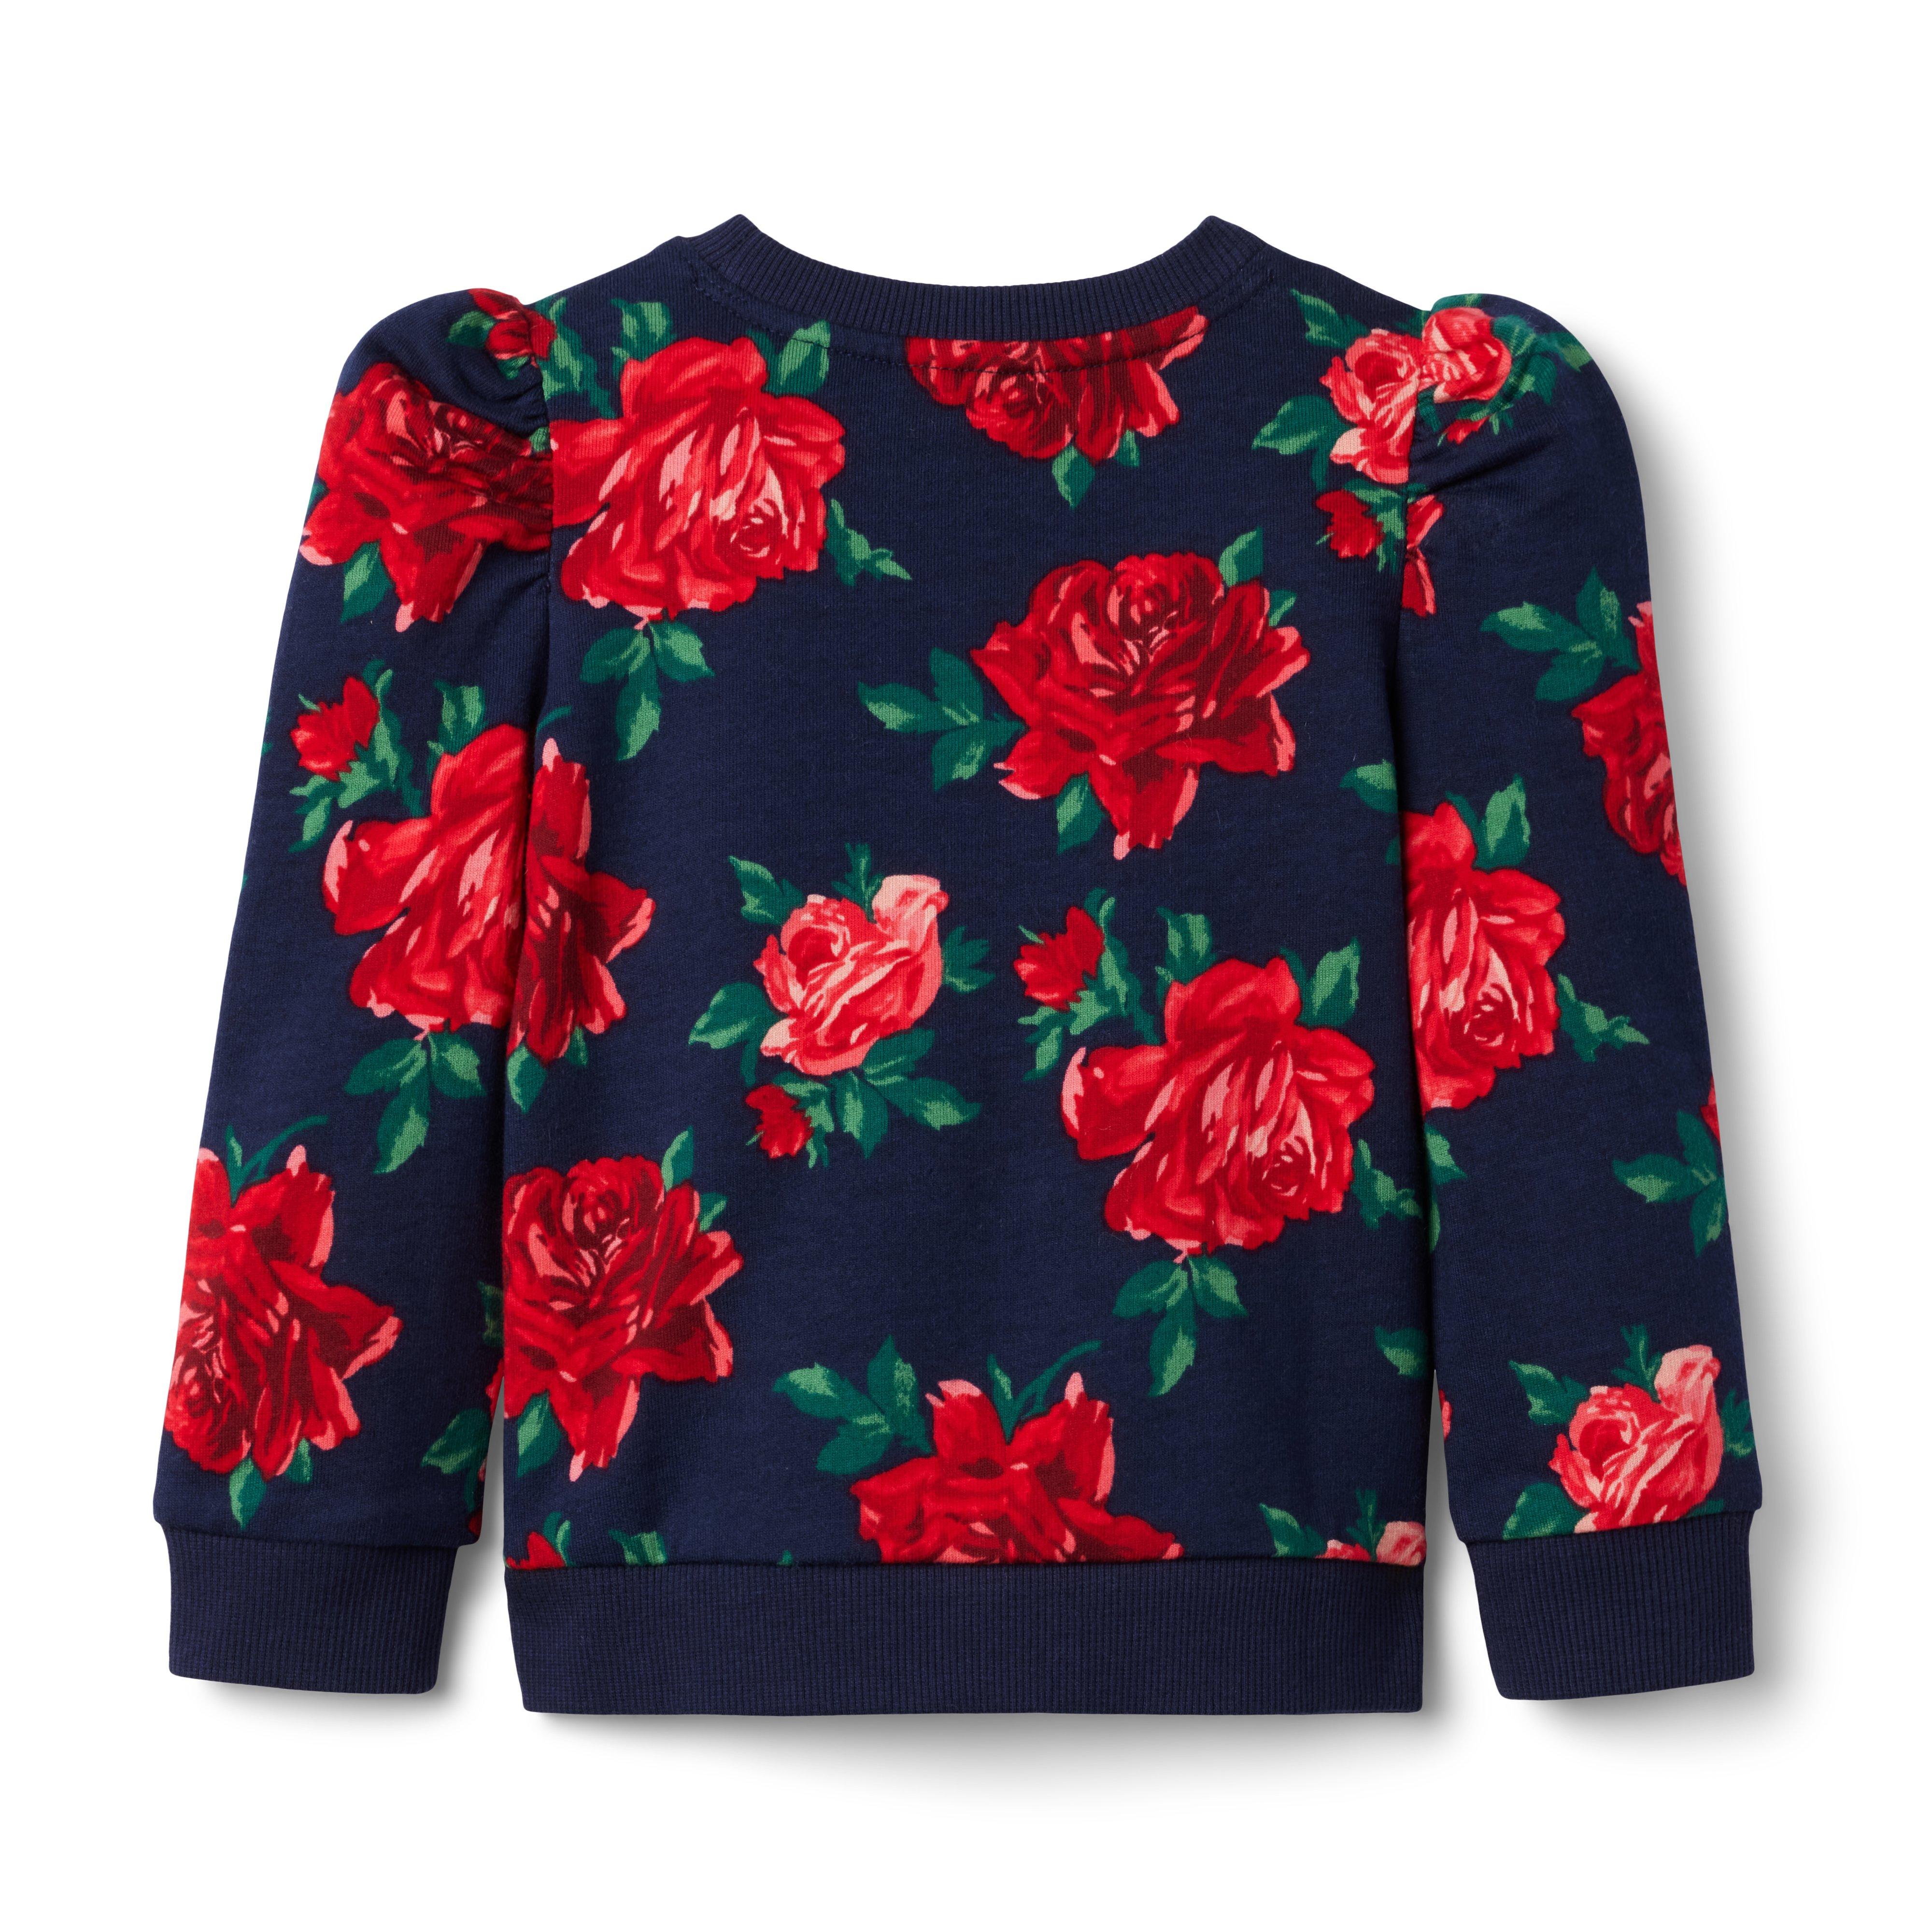 American Girl® x Janie and Jack Wrapped In Roses Party Top image number 2